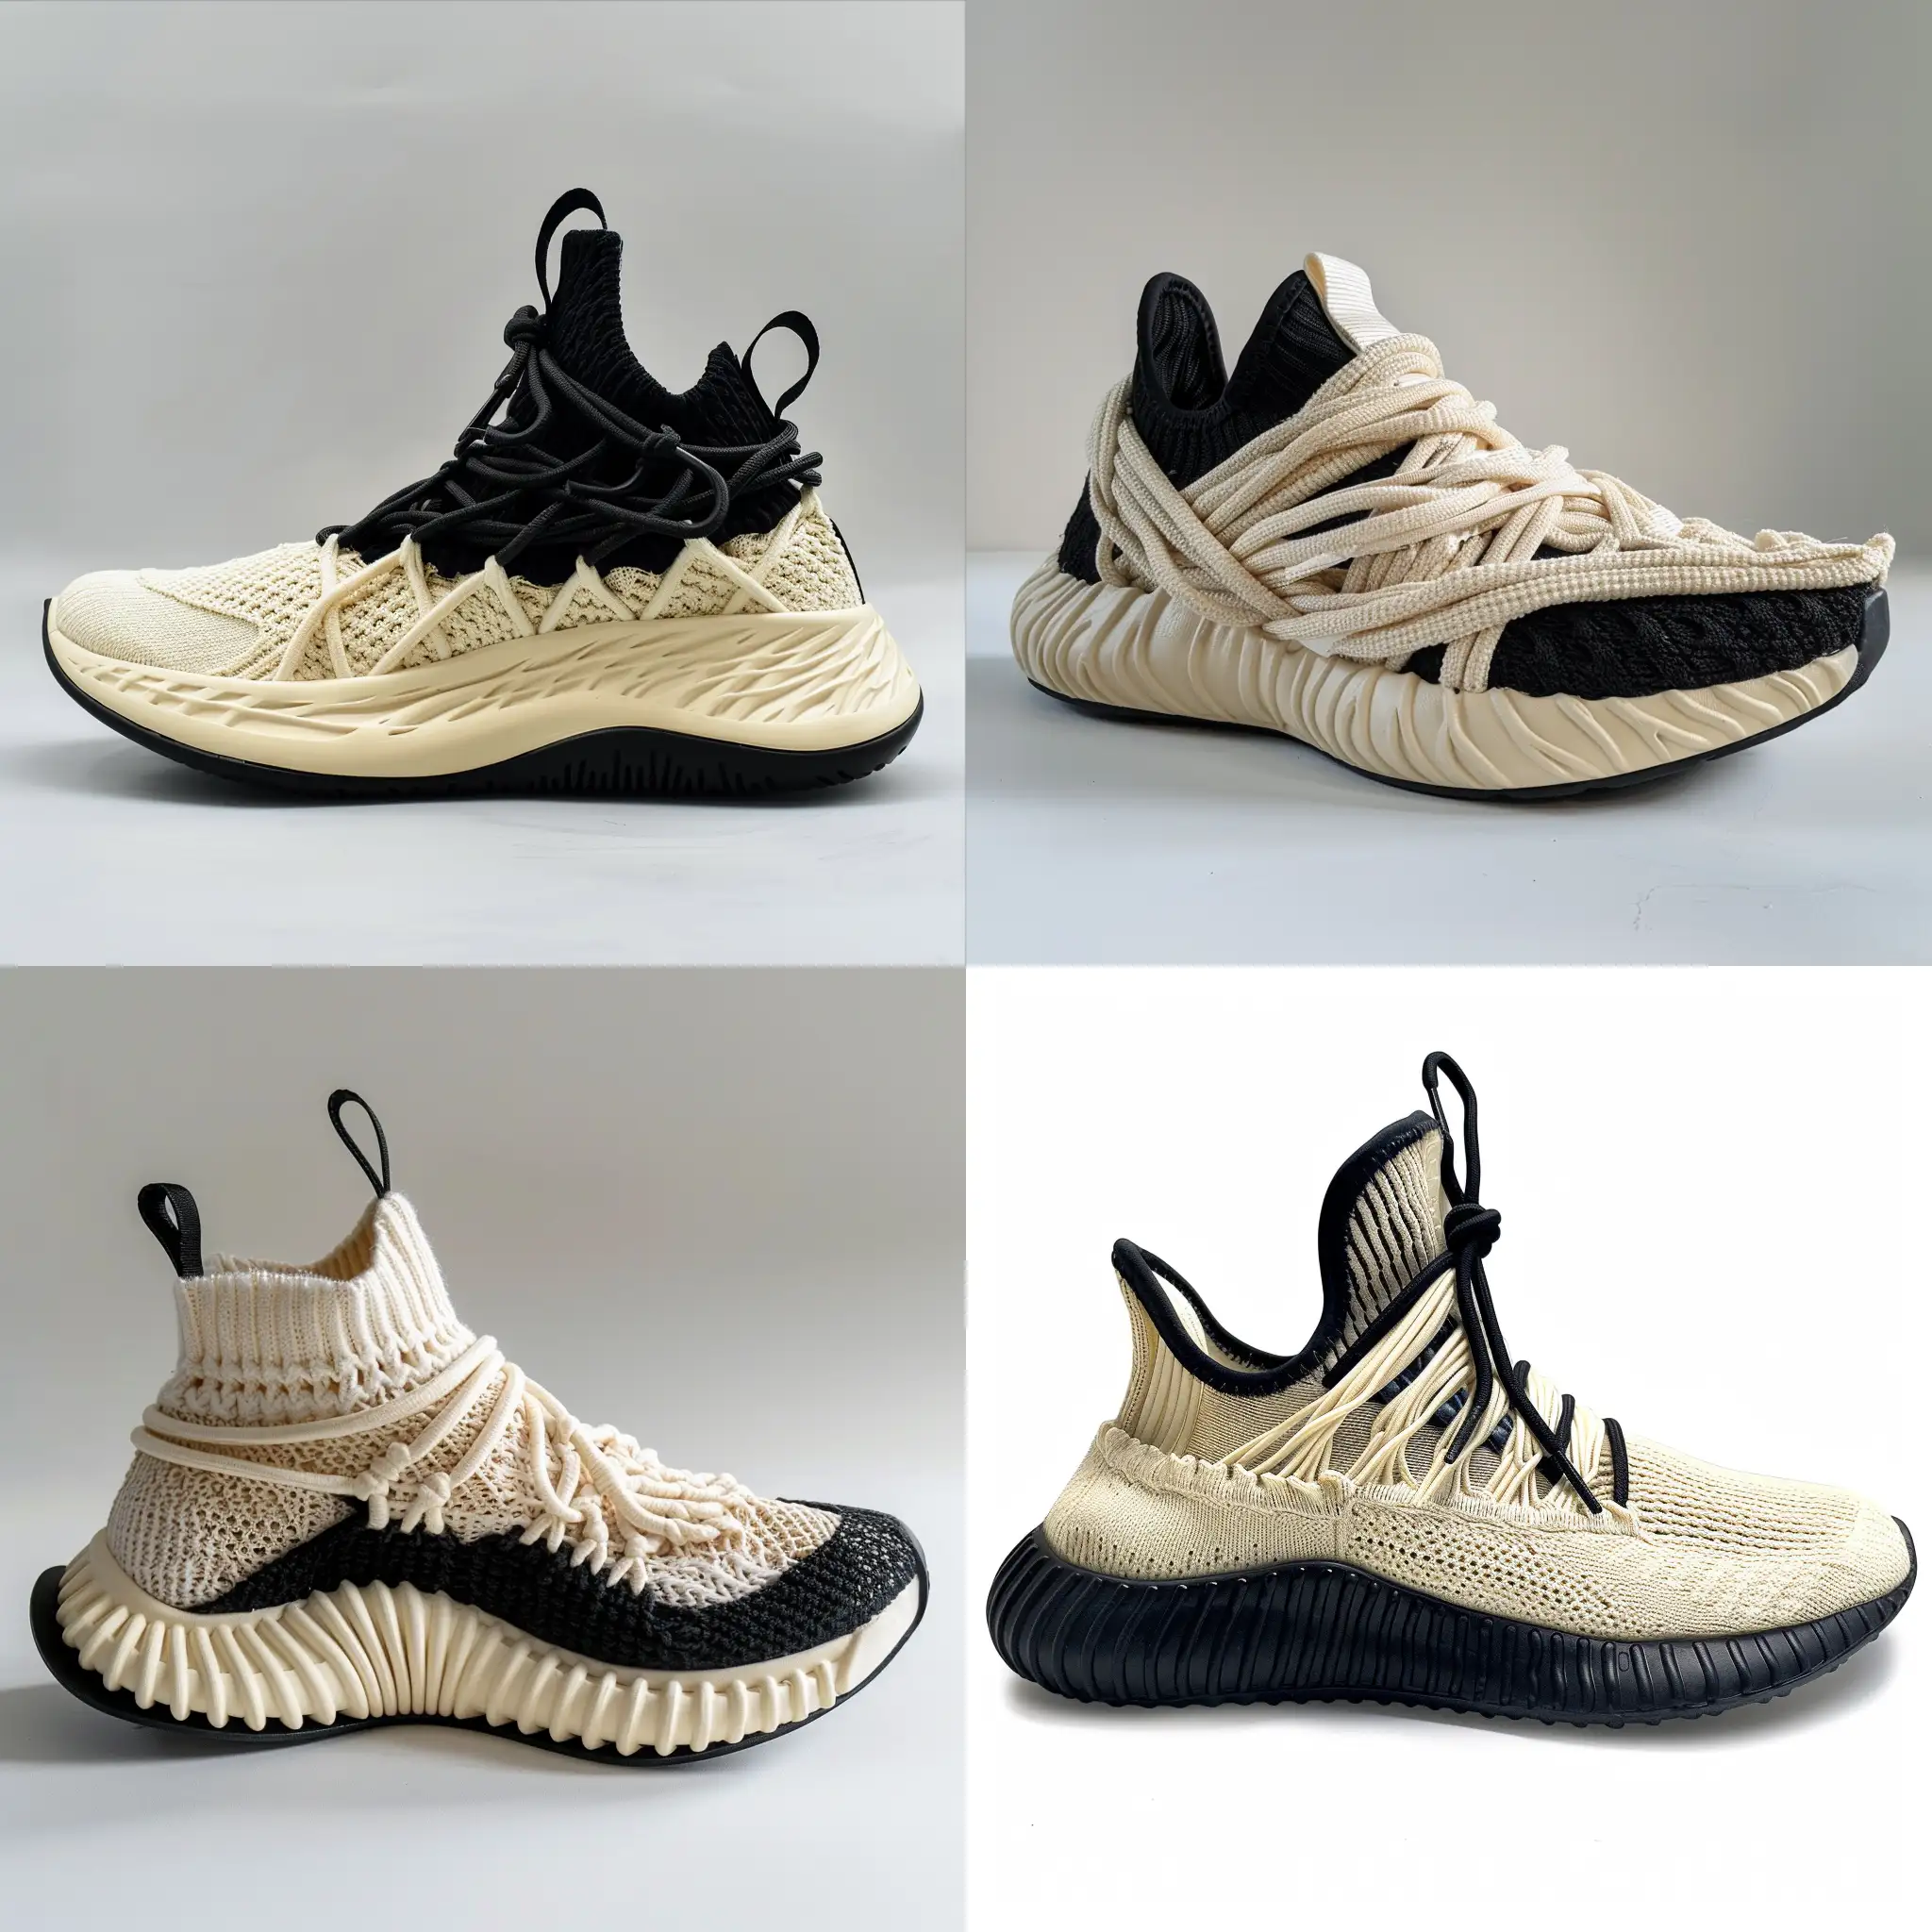 Sneakers design , running and sports , inspired by knitted fabrics , cream color rubber midsole , knitted cables on midsole , some knitted cables on upper , upper color black and cream , low neck , black outsole